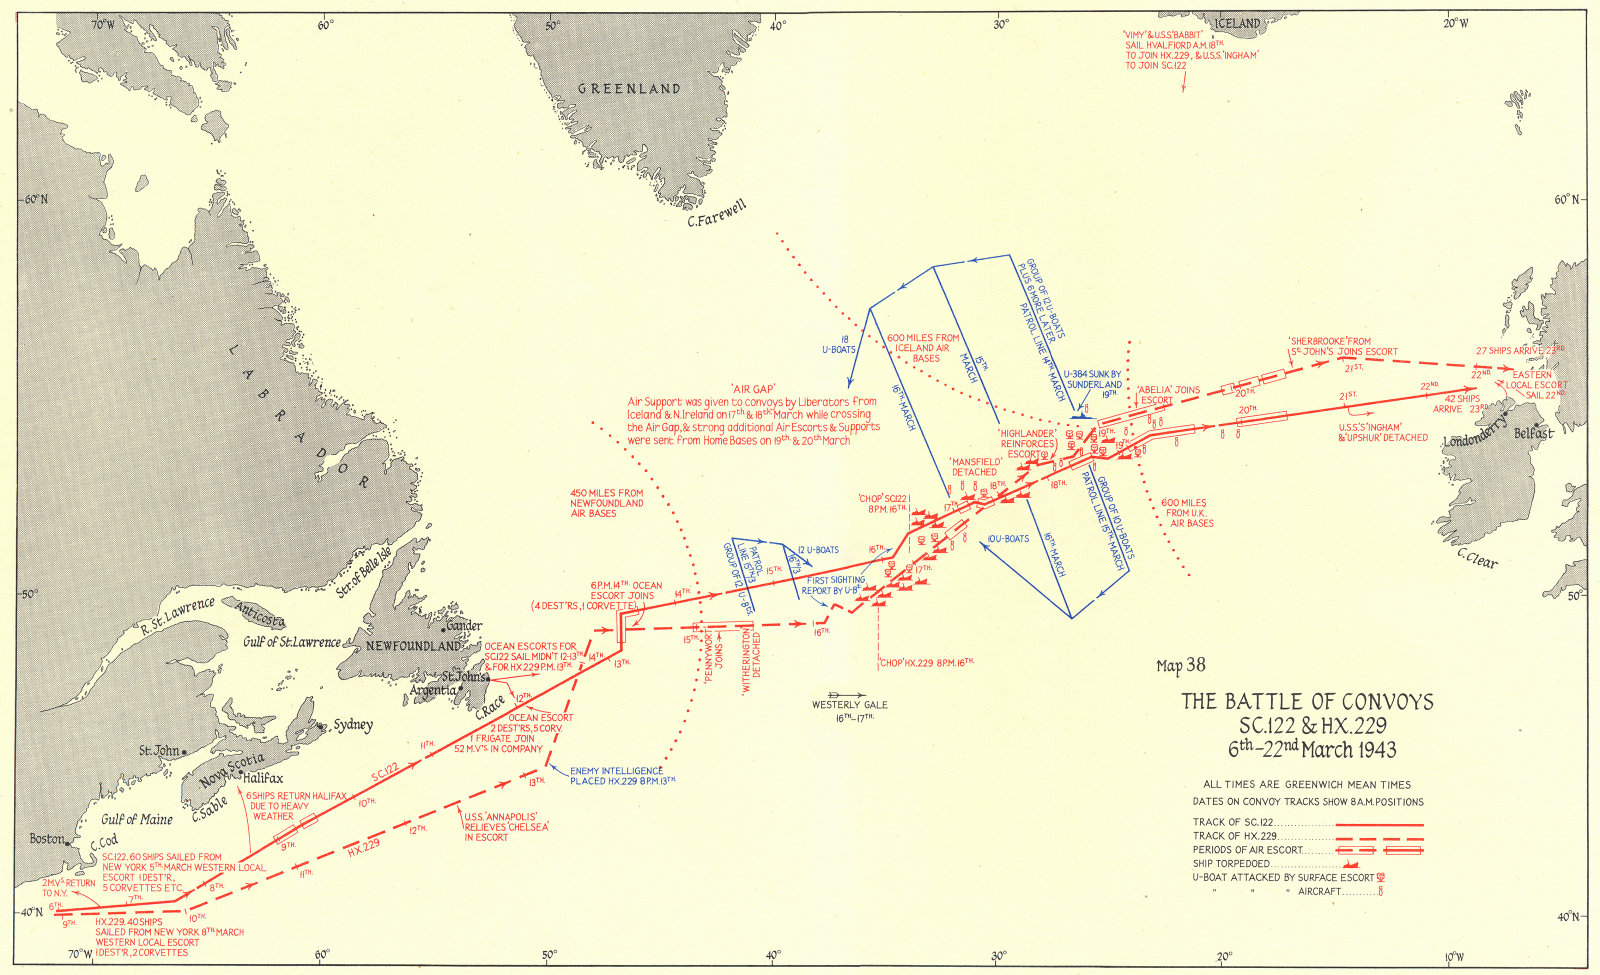 BATTLE OF THE ATLANTIC. Convoys SC 122 & HX 229 6th-22nd March 1943 1956 map